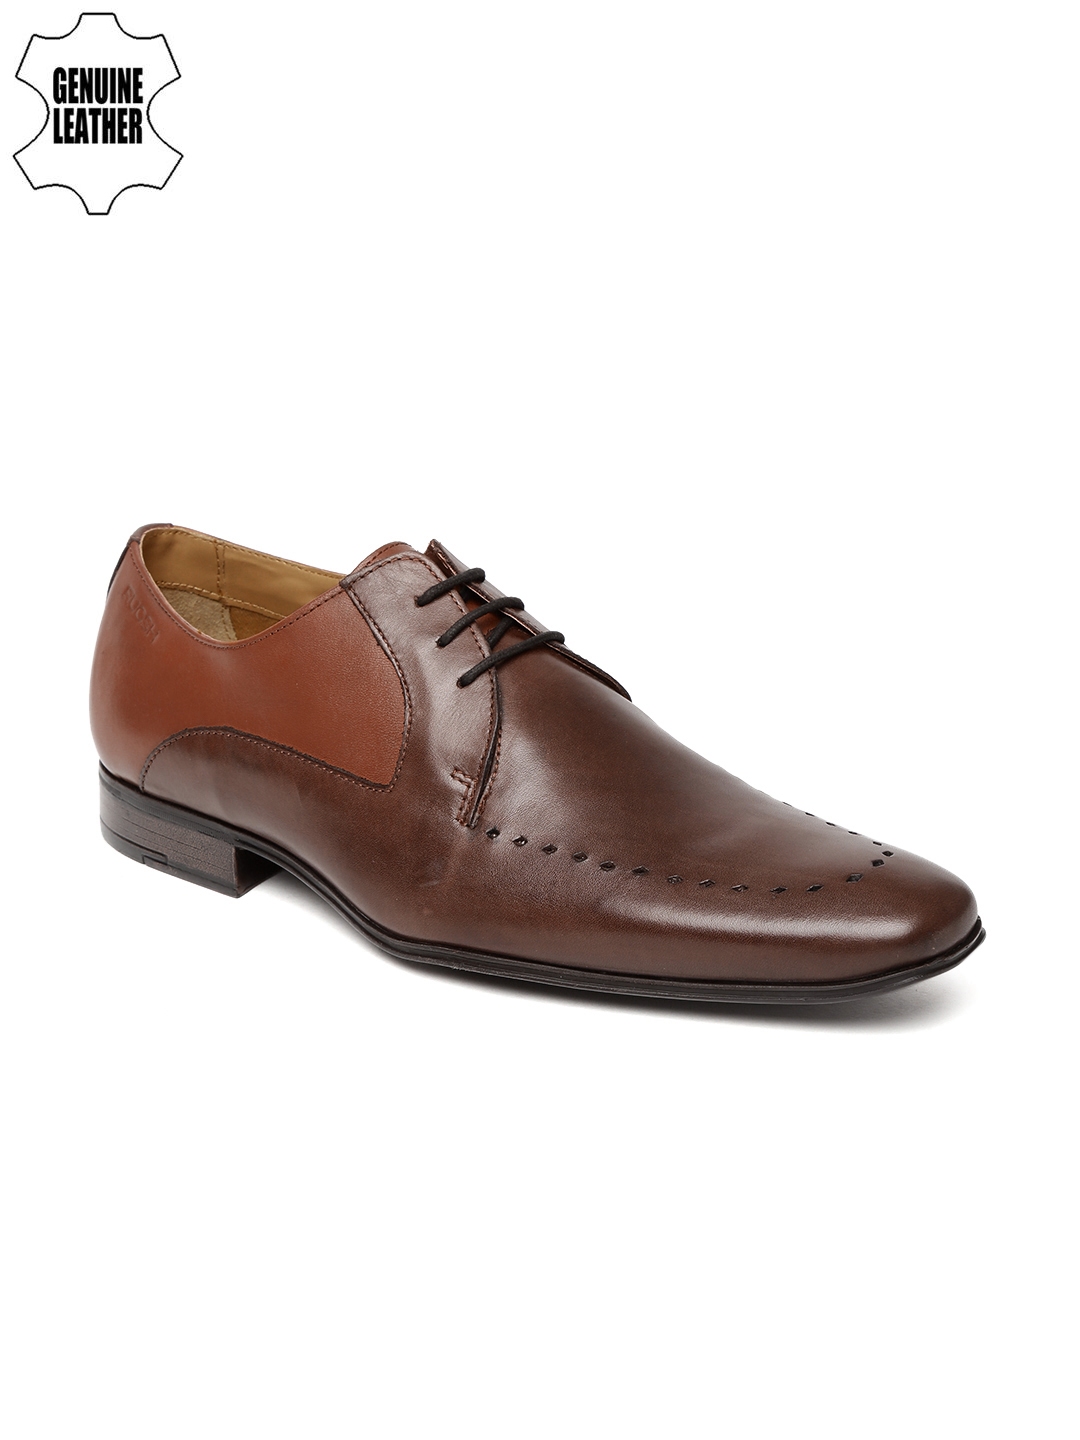 ruosh oxford shoes